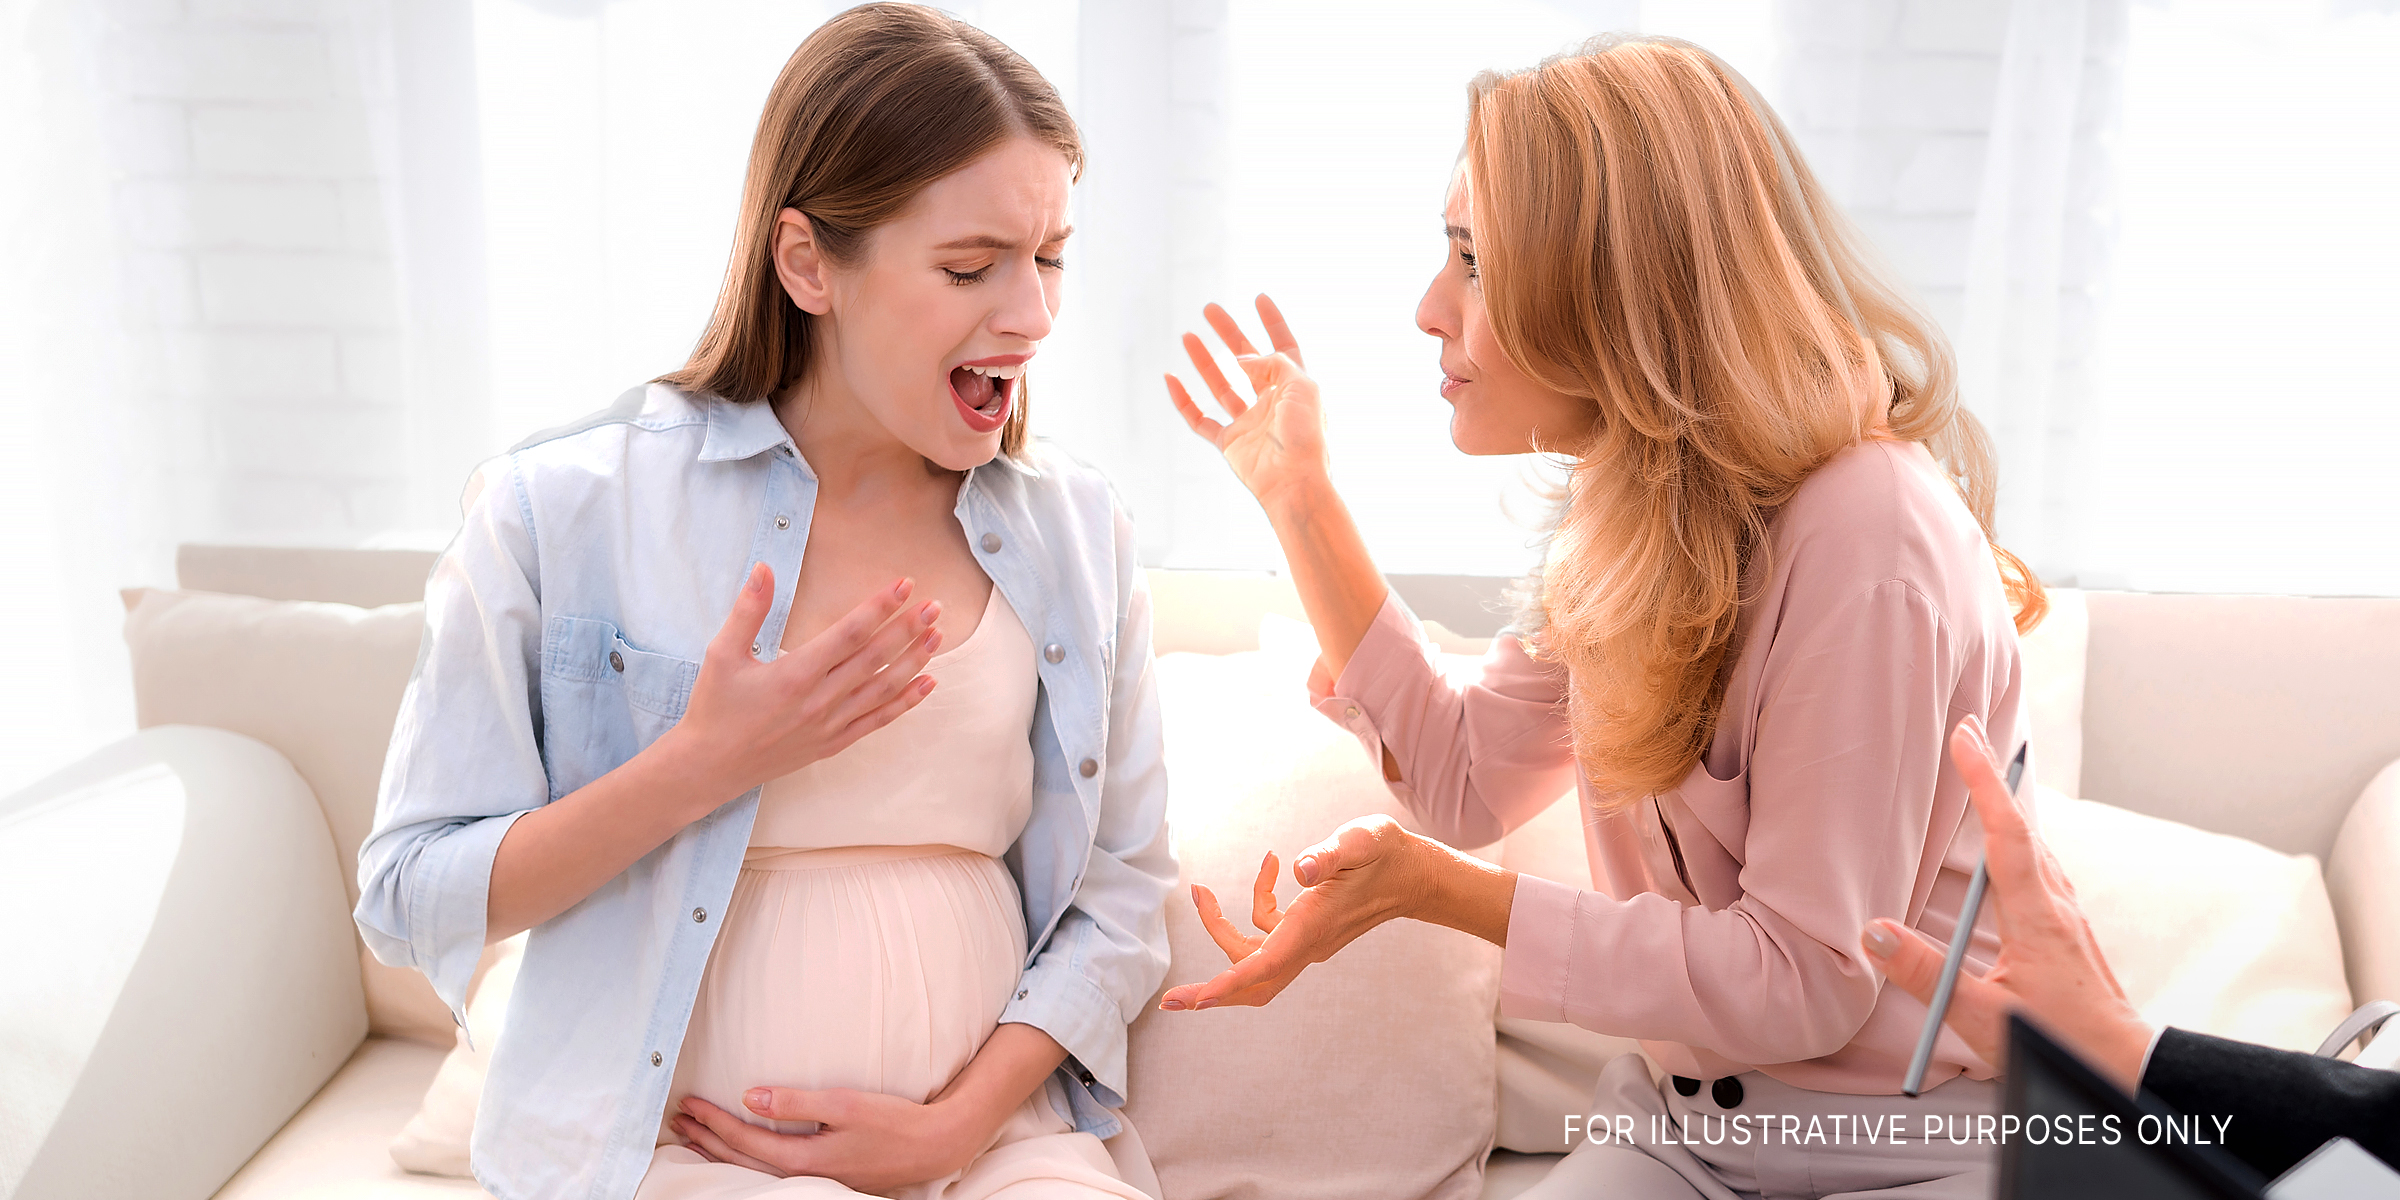 A pregnant teen and her mother | Source: Shutterstock